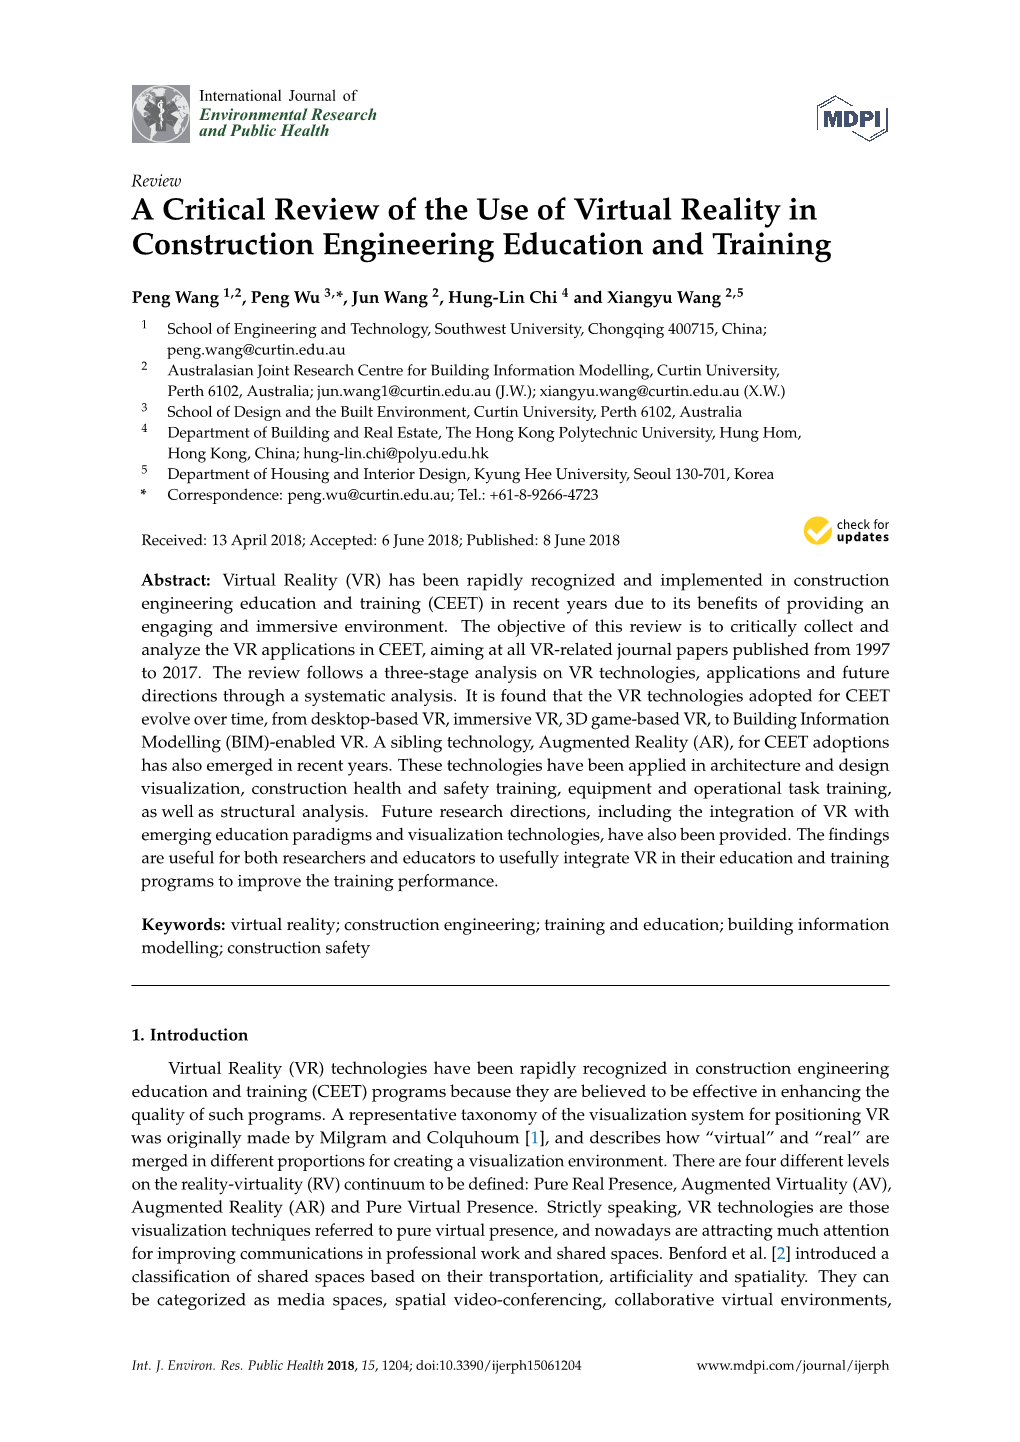 A Critical Review of the Use of Virtual Reality in Construction Engineering Education and Training